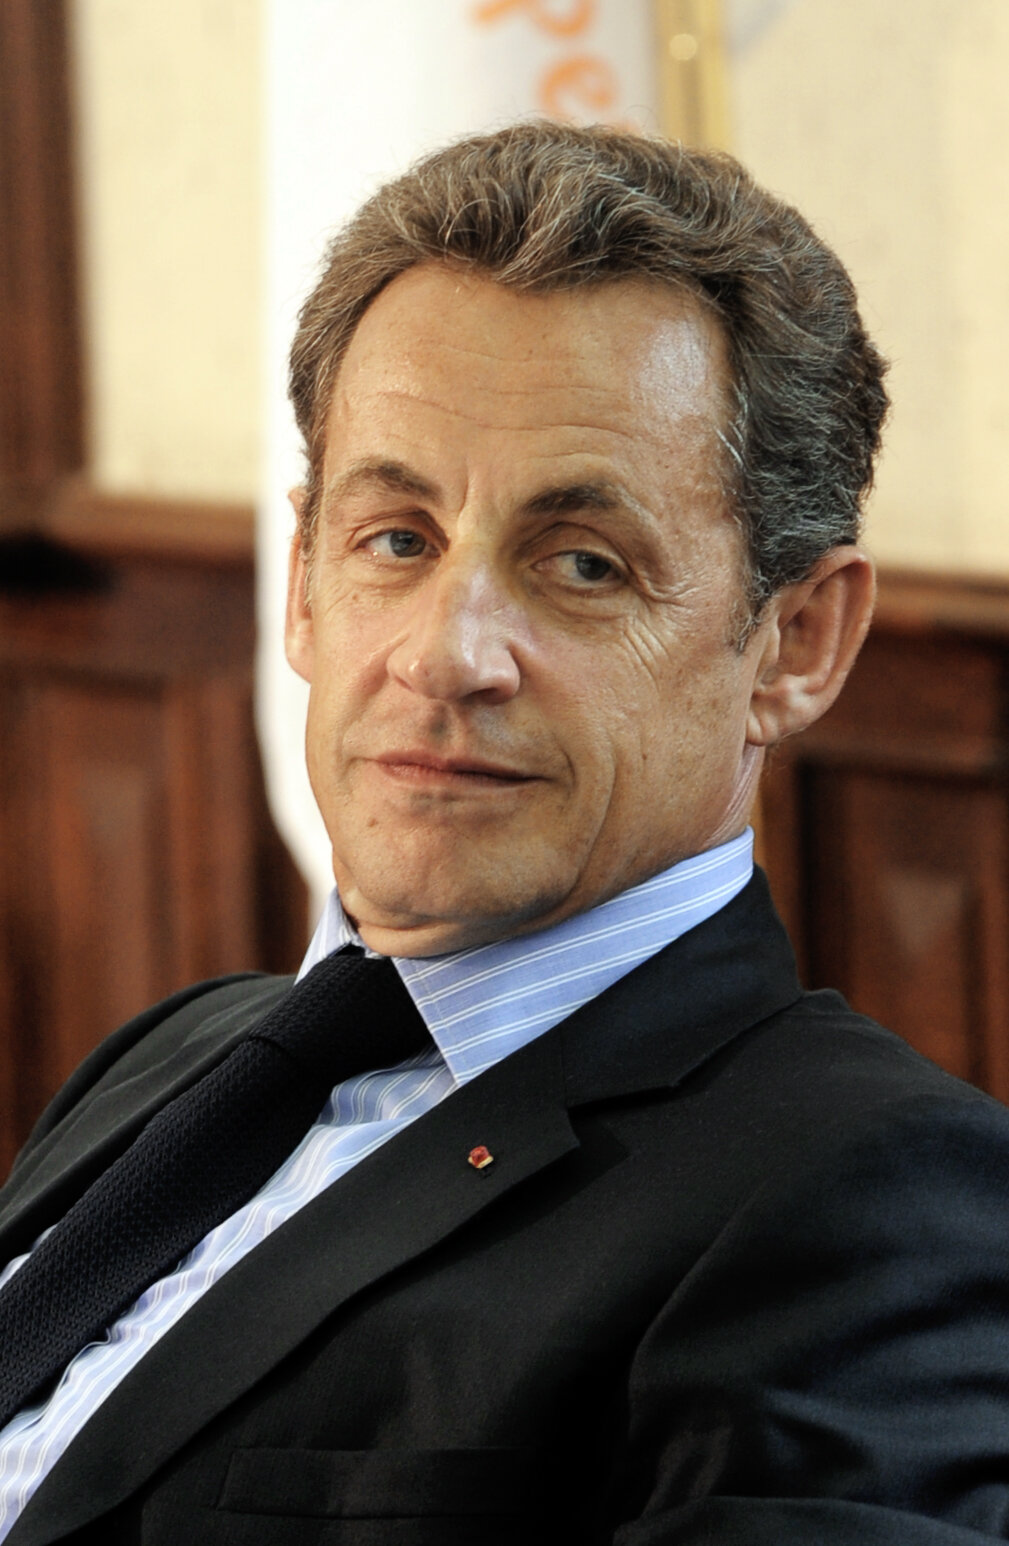 Nicolas SarkozyBy European People's Party - EPP Summit October 2010, CC BY 2.0, https://commons.wikimedia.org/w/index.php?curid=12162667